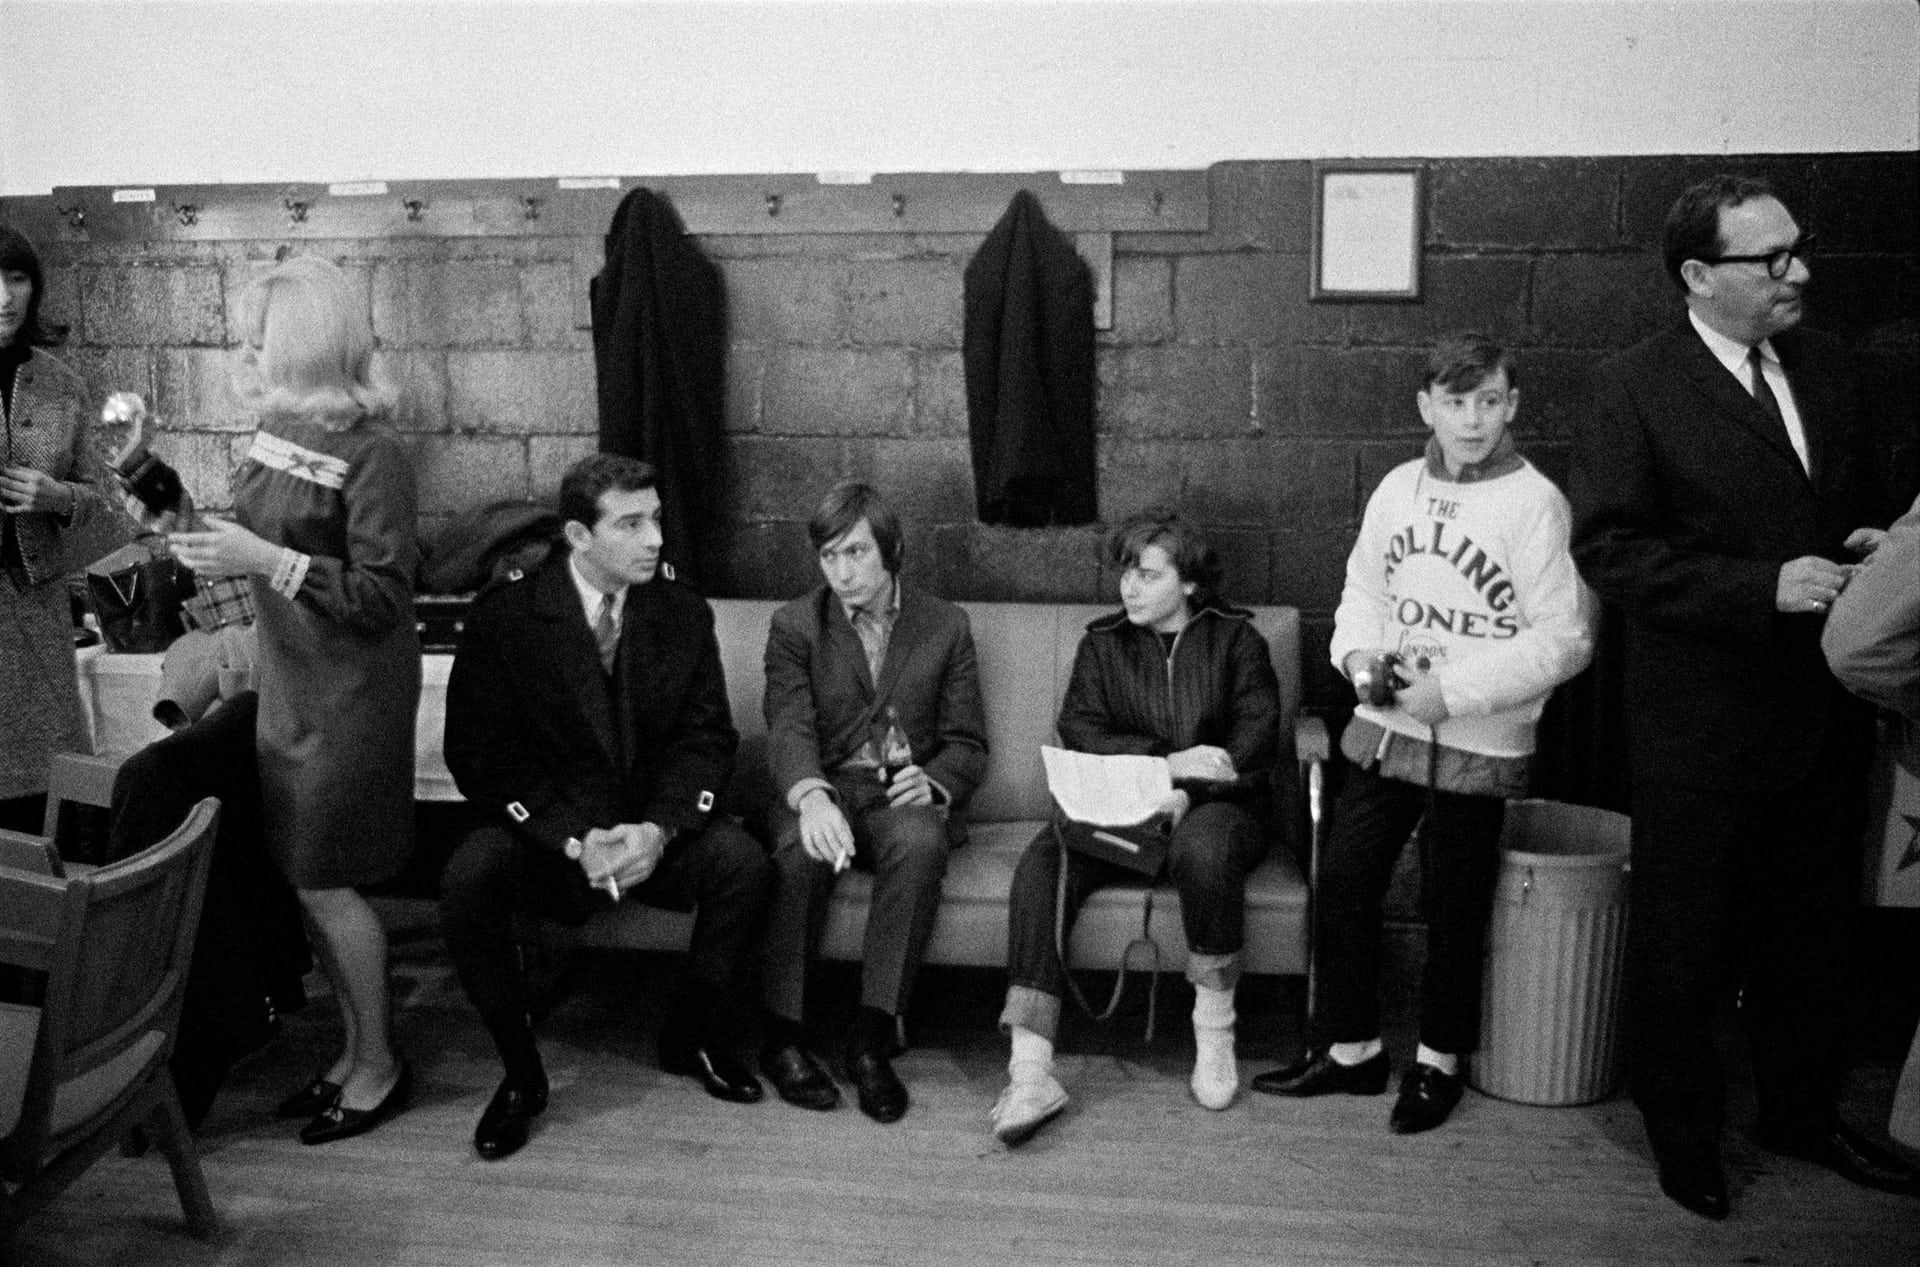 Fans and the promoter’s friends (1965) ‘Signing autographs was a chore the band dealt with before each show with resignation but endless good humour, generosity and kindness’ says Gered Mankowitz